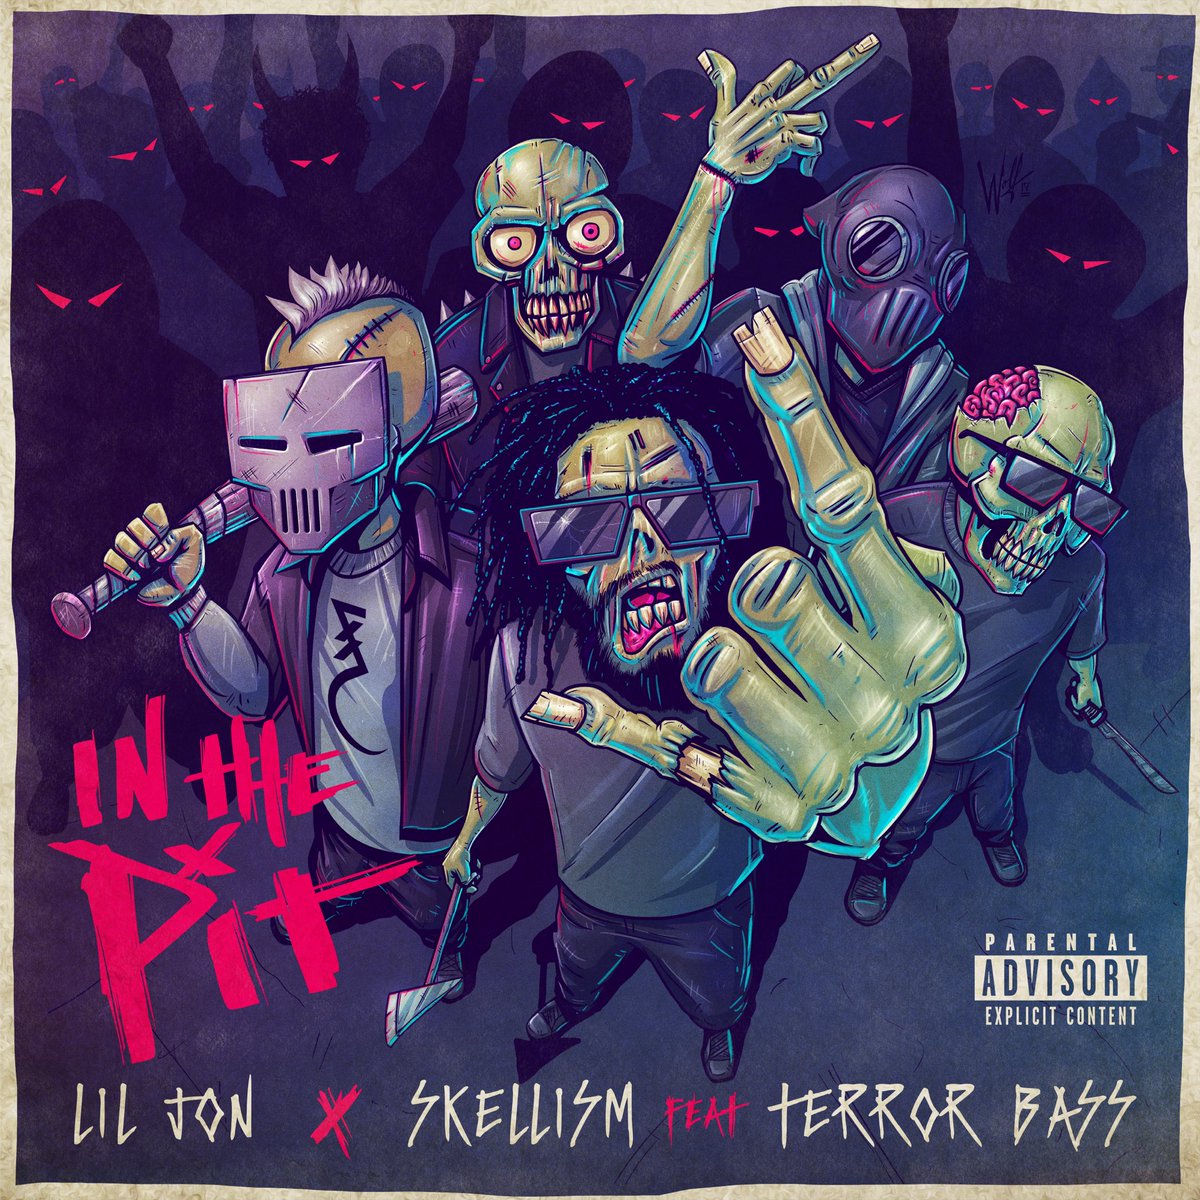 IN THE PIT w/ @LilJon @Skellism @itsterrorbass AVAILABLE EVERYWHERE NOW!!!!! https://t.co/d6N3zUlWiC https://t.co/3Bo84DaY9Q